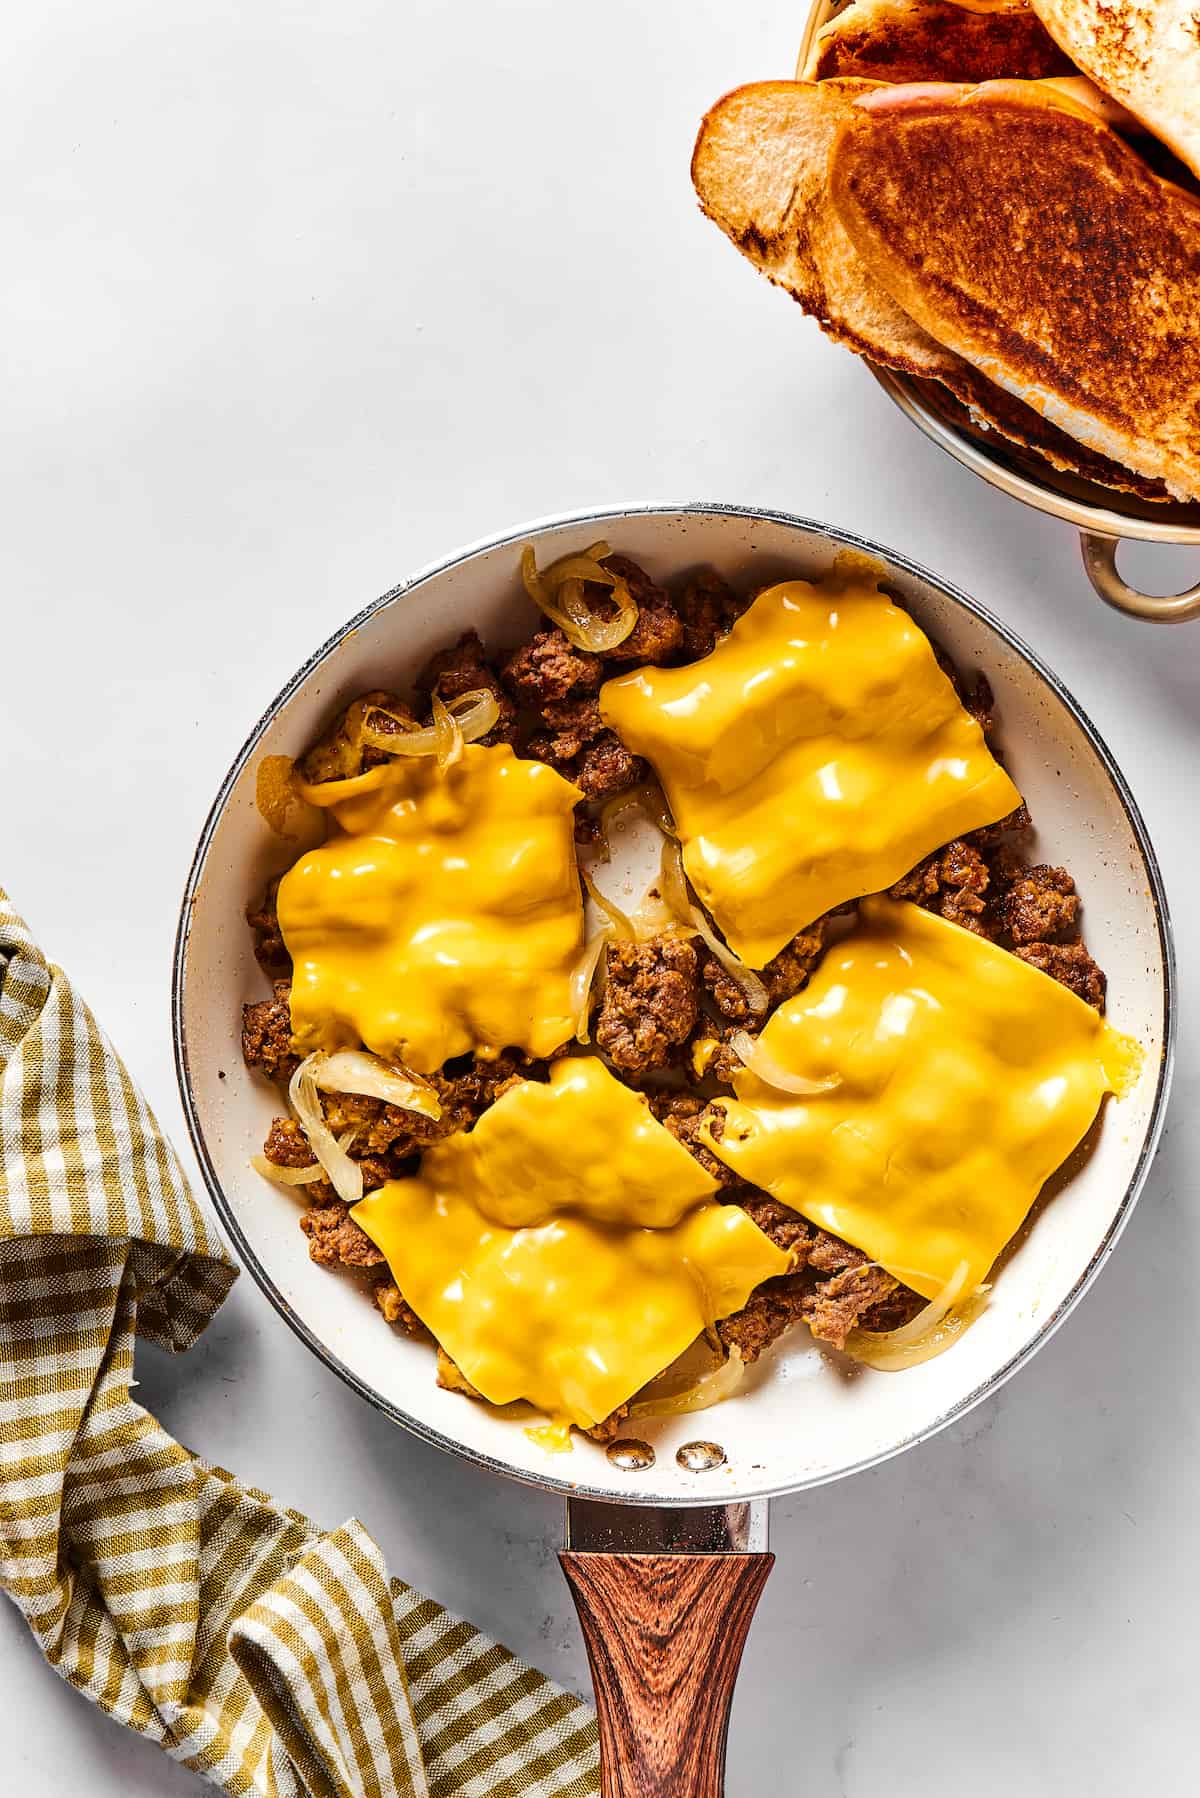 Crumbled ground beef topped with yellow American cheese